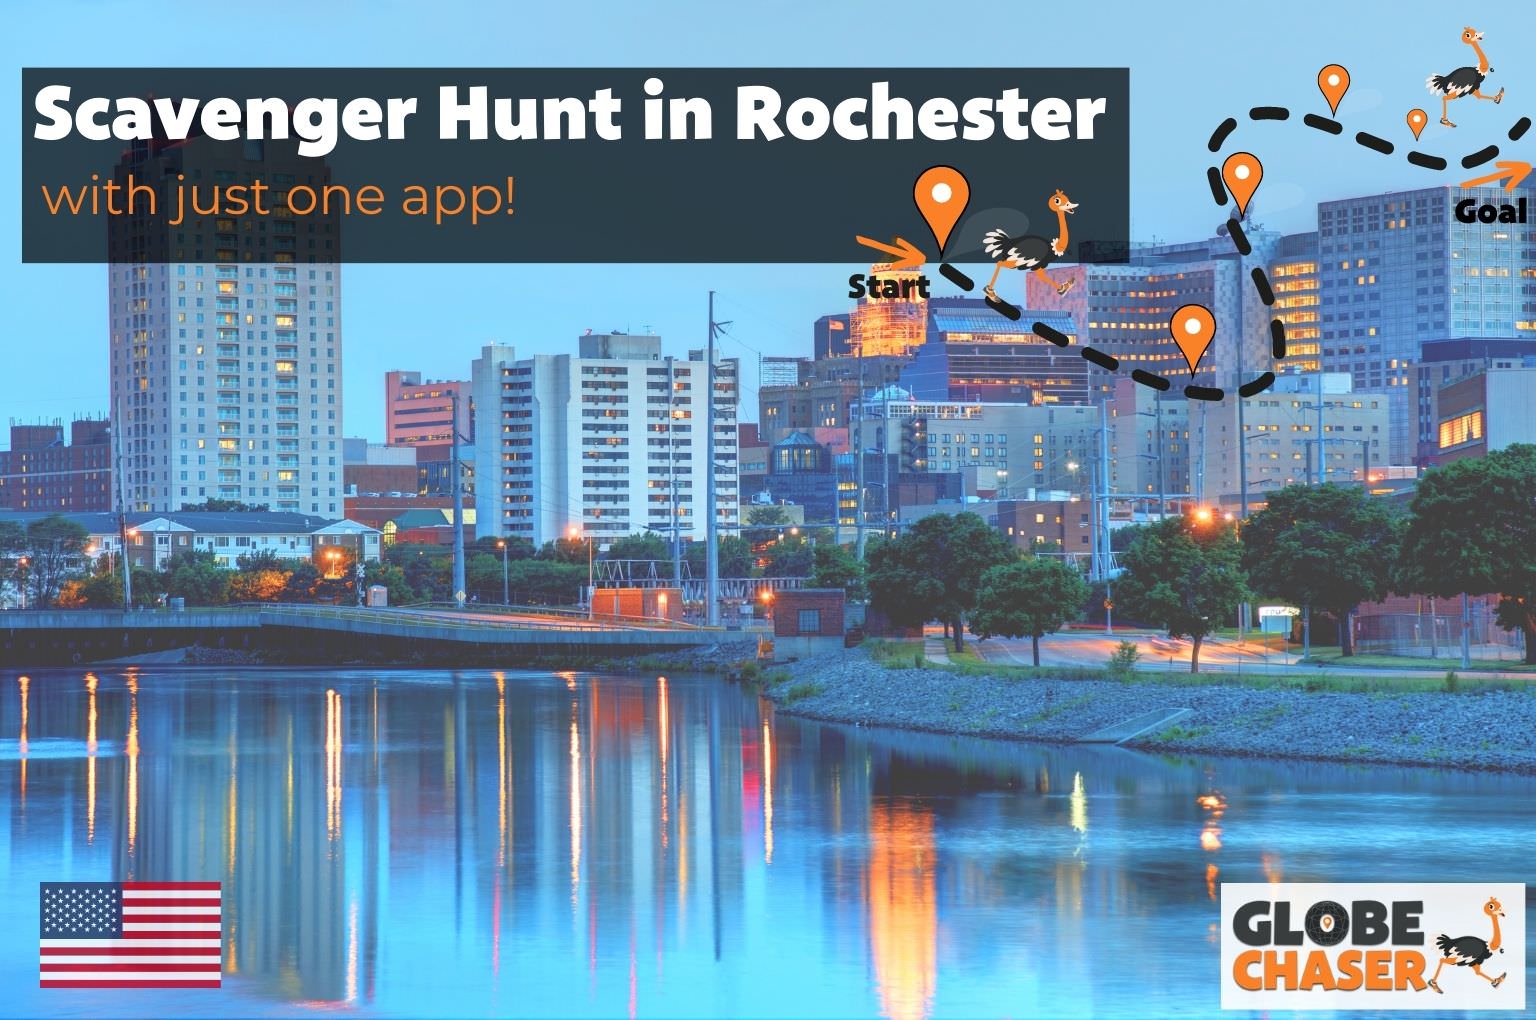 Scavenger Hunt in Rochester, USA - Family Activities with the Globe Chaser App for Outdoor Fun